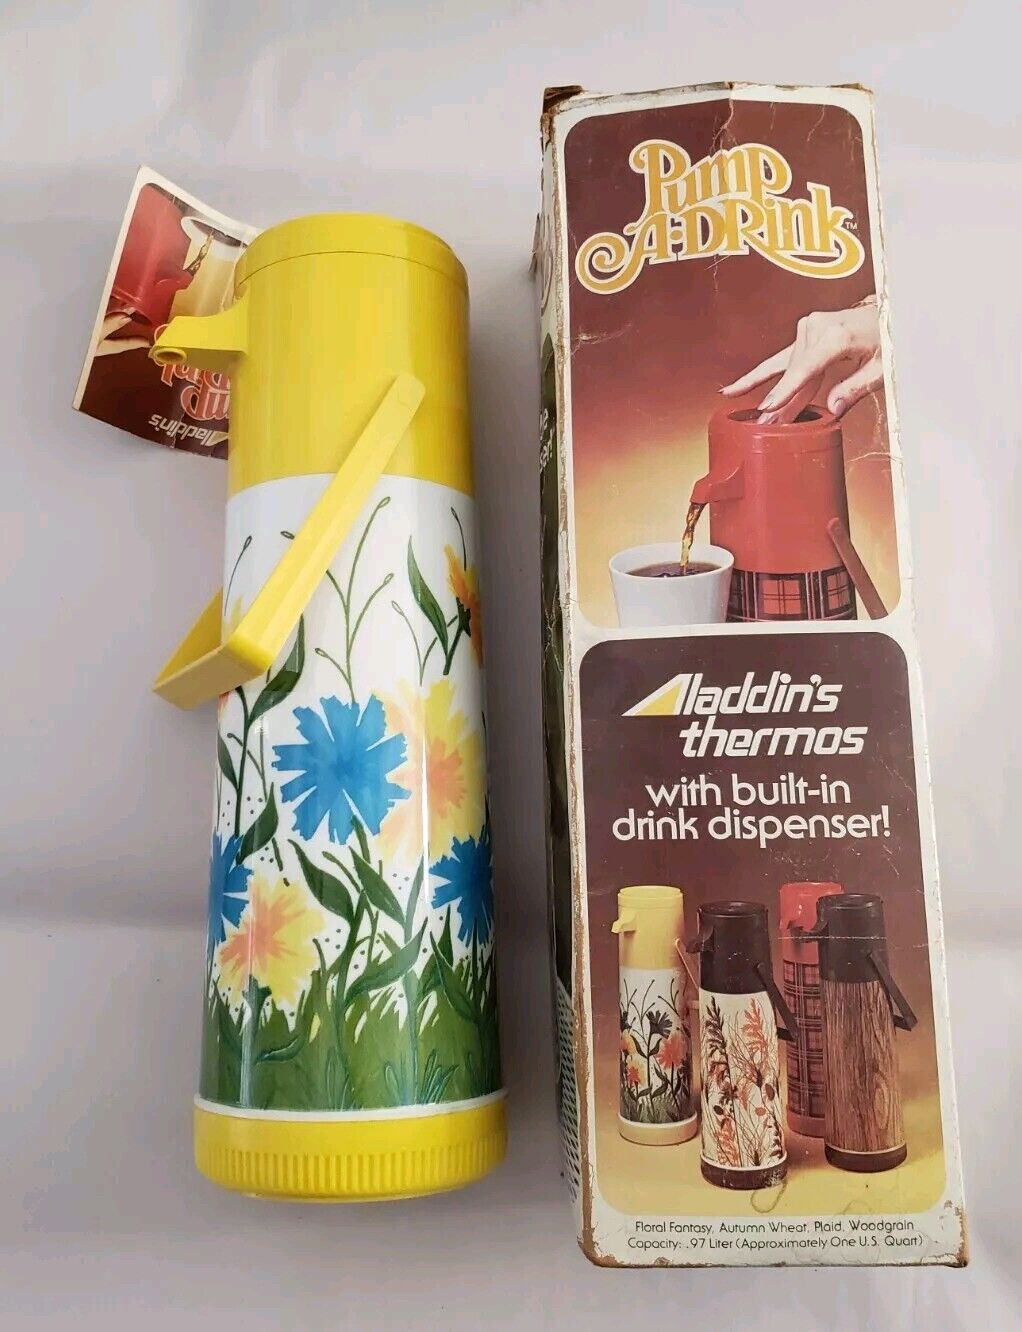 Vintage Alladin's Pump-A-Drink Insulated Drink Dispenser Thermos P150